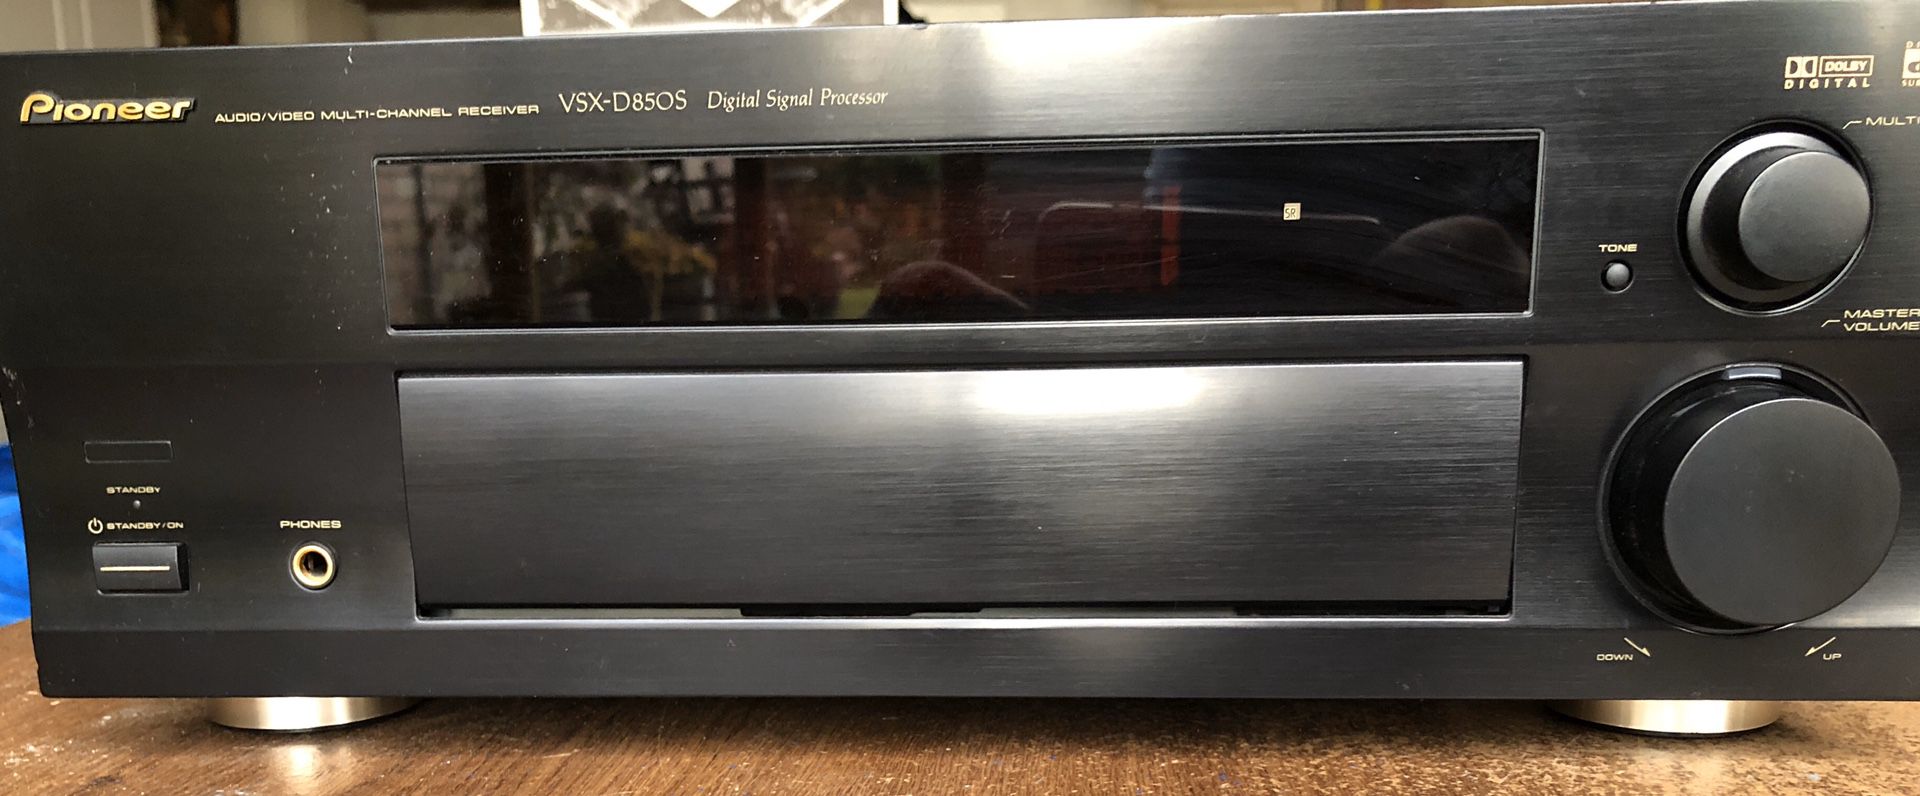 Pioneer VSX-D850S Stereo Receiver